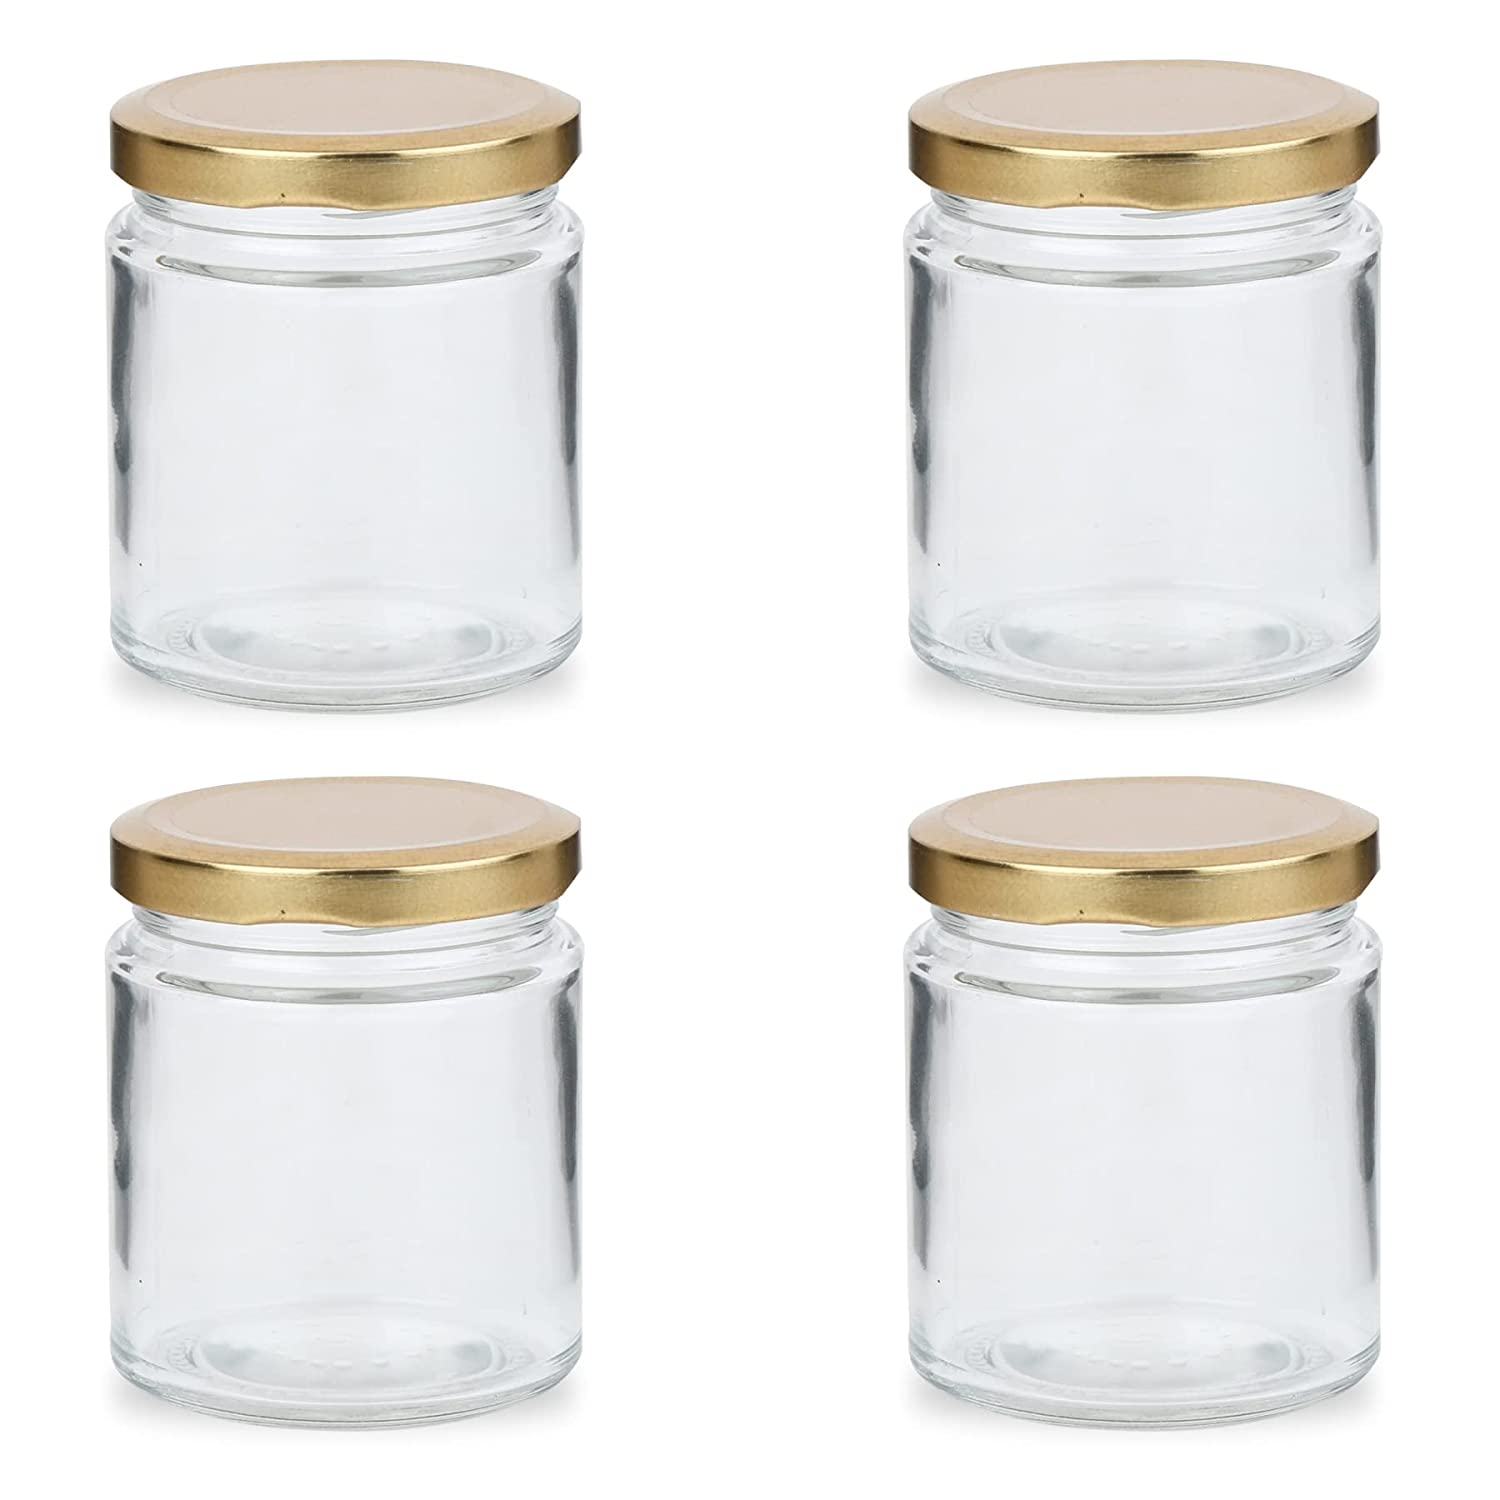 Glass jar with Golden lid